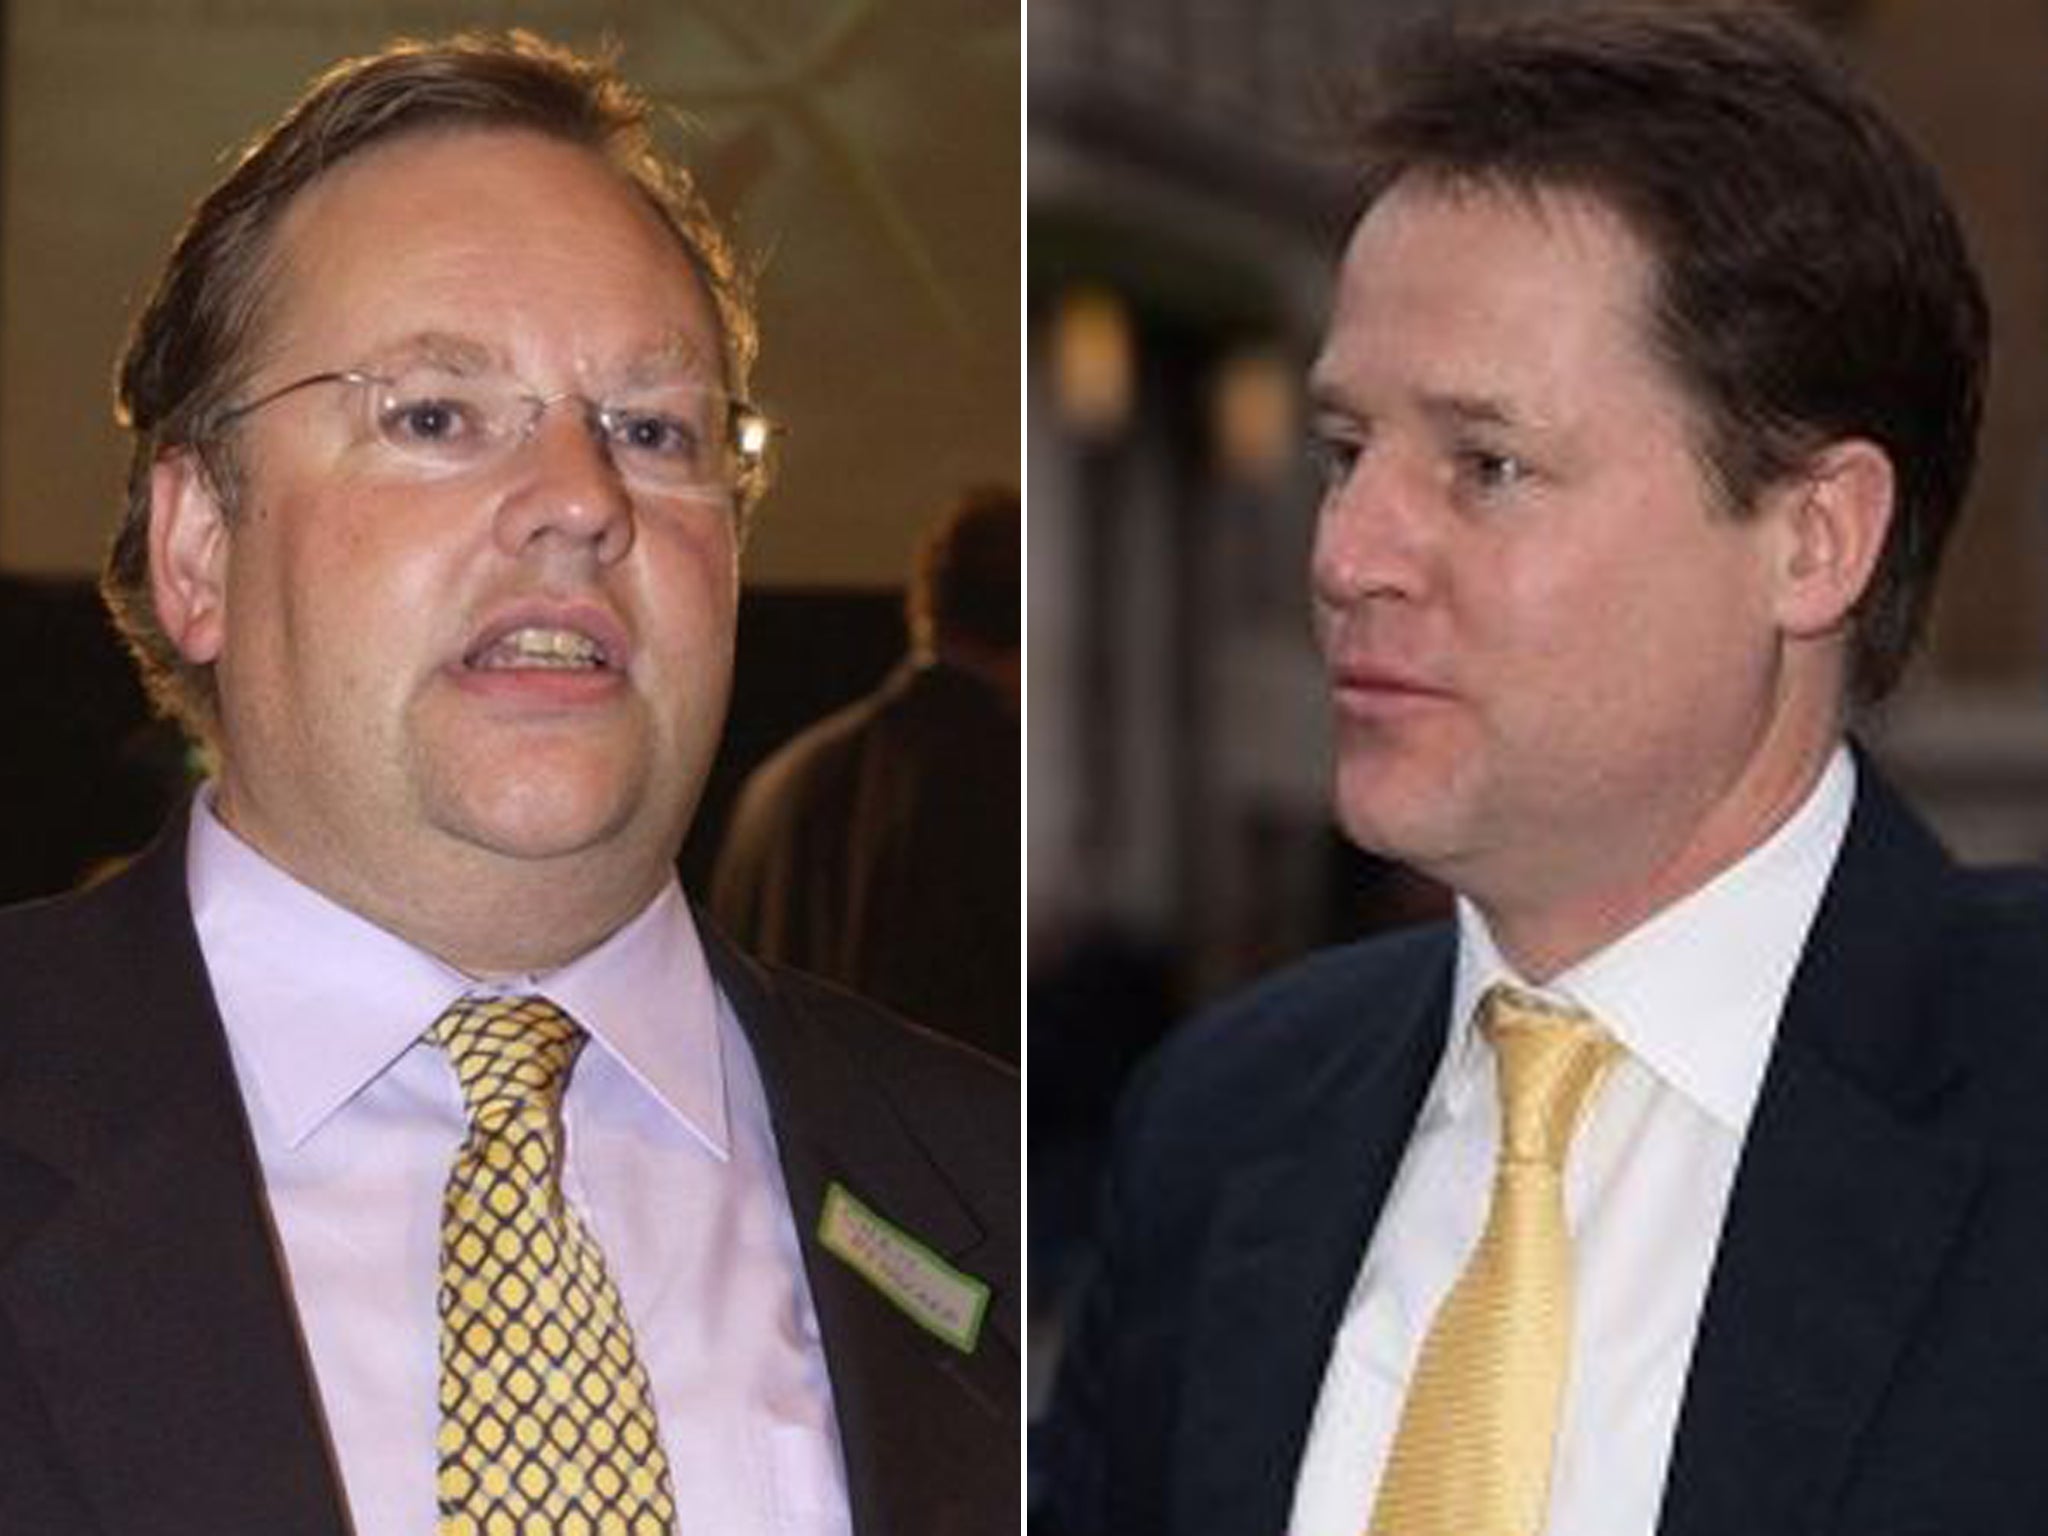 Lord Rennard, left, and Nick Clegg